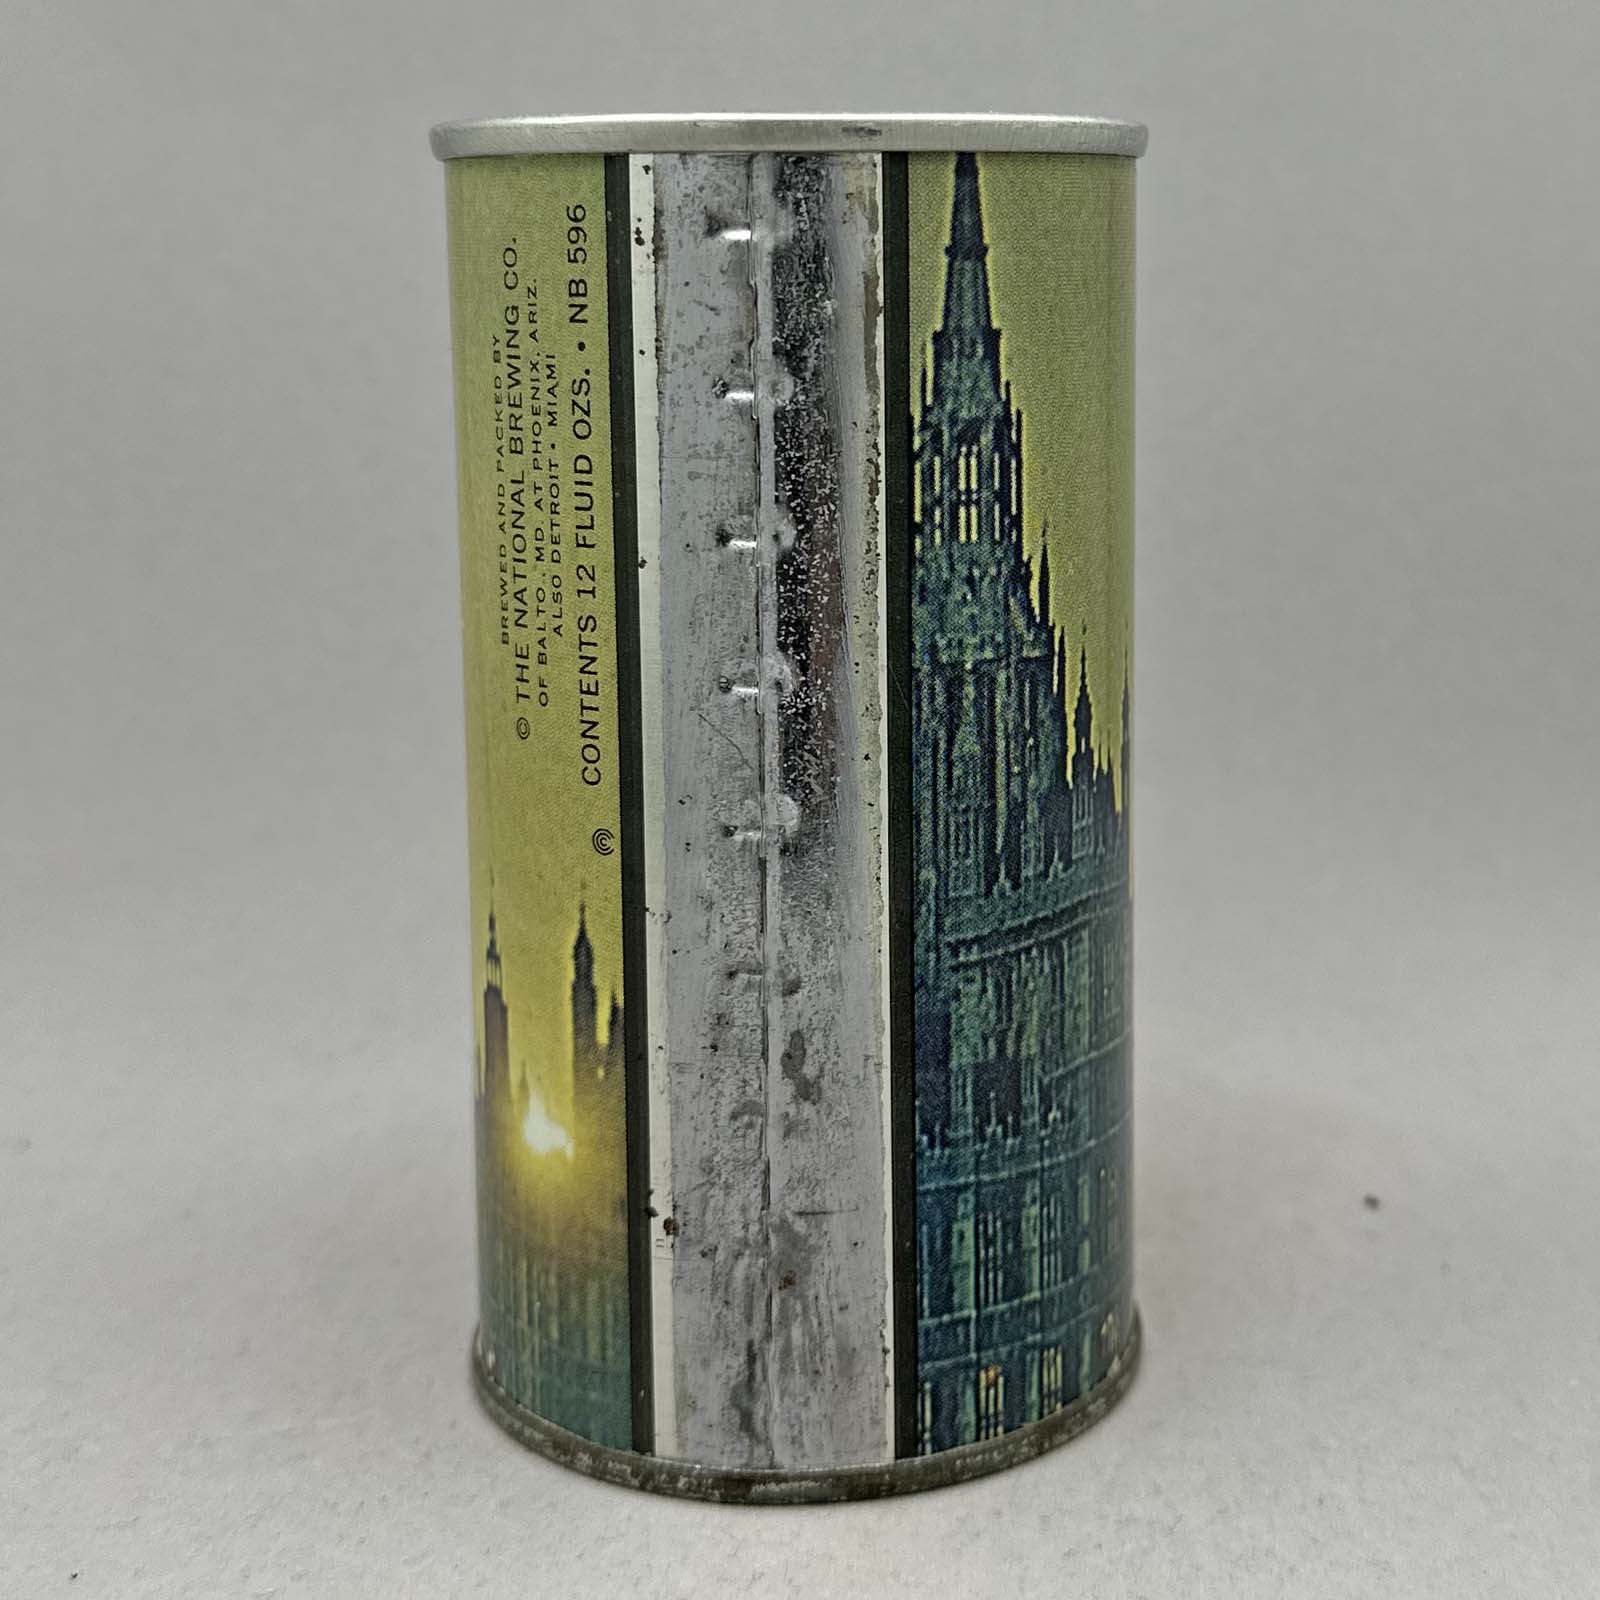 007 82-29 pull tab beer can 3